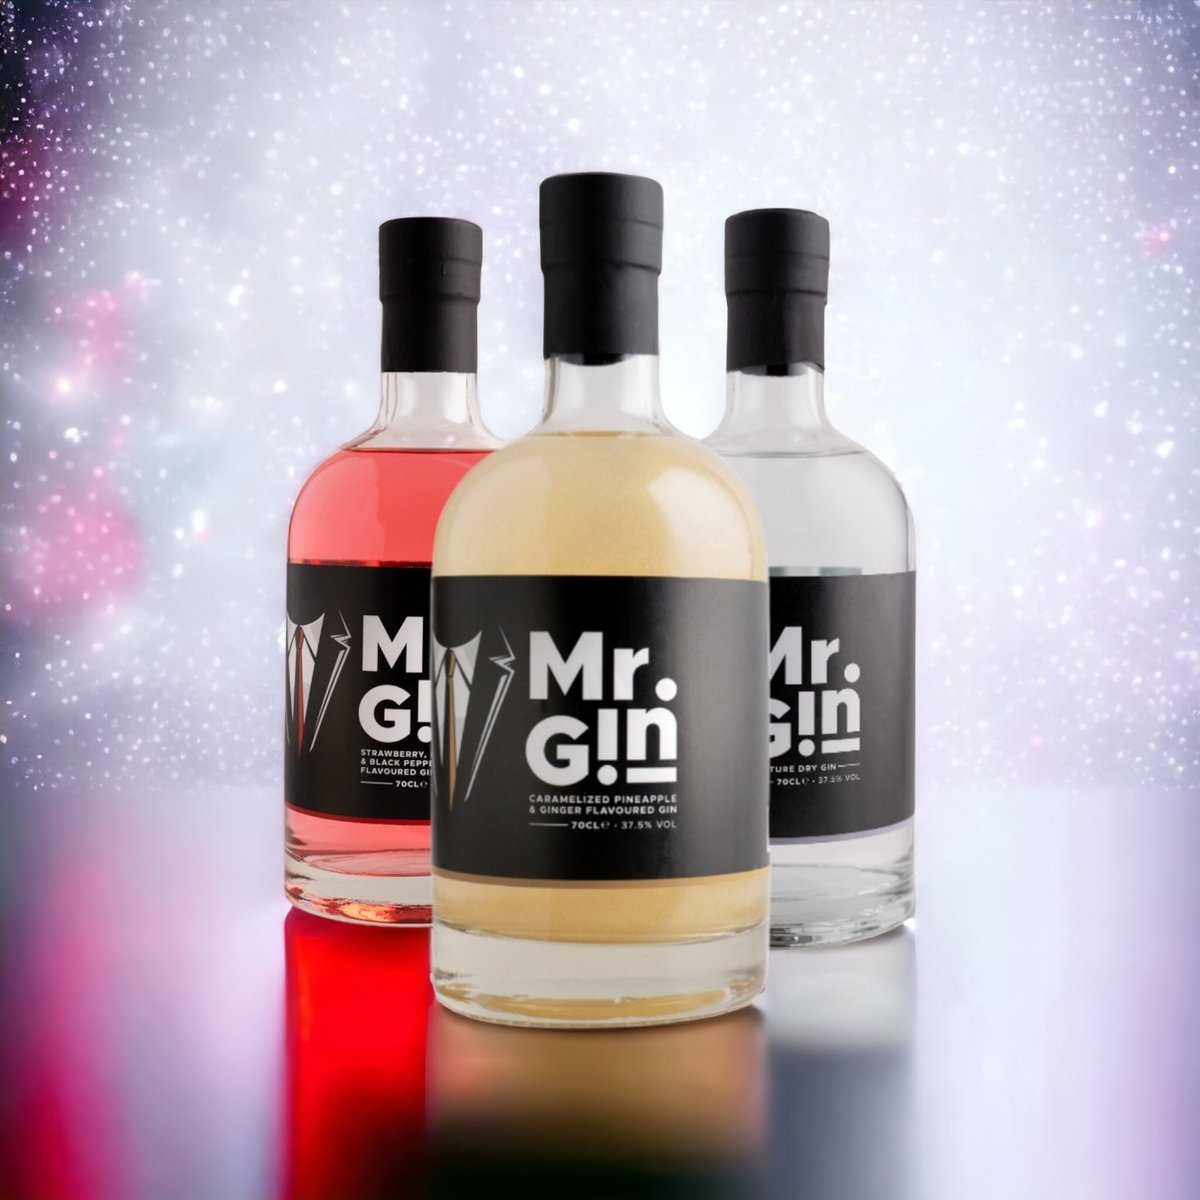 🍸🌟 Introducing the newest sensation in the world of gin - Mr. Gin! 🌟🍸Unleash your taste buds with our premium botanical blend, carefully crafted to perfection. 🌿✨Taste the difference - Experience Mr. Gin! 🍸😍
#MrGin #GinLovers #CheersToNewBeginnings #GinTasting